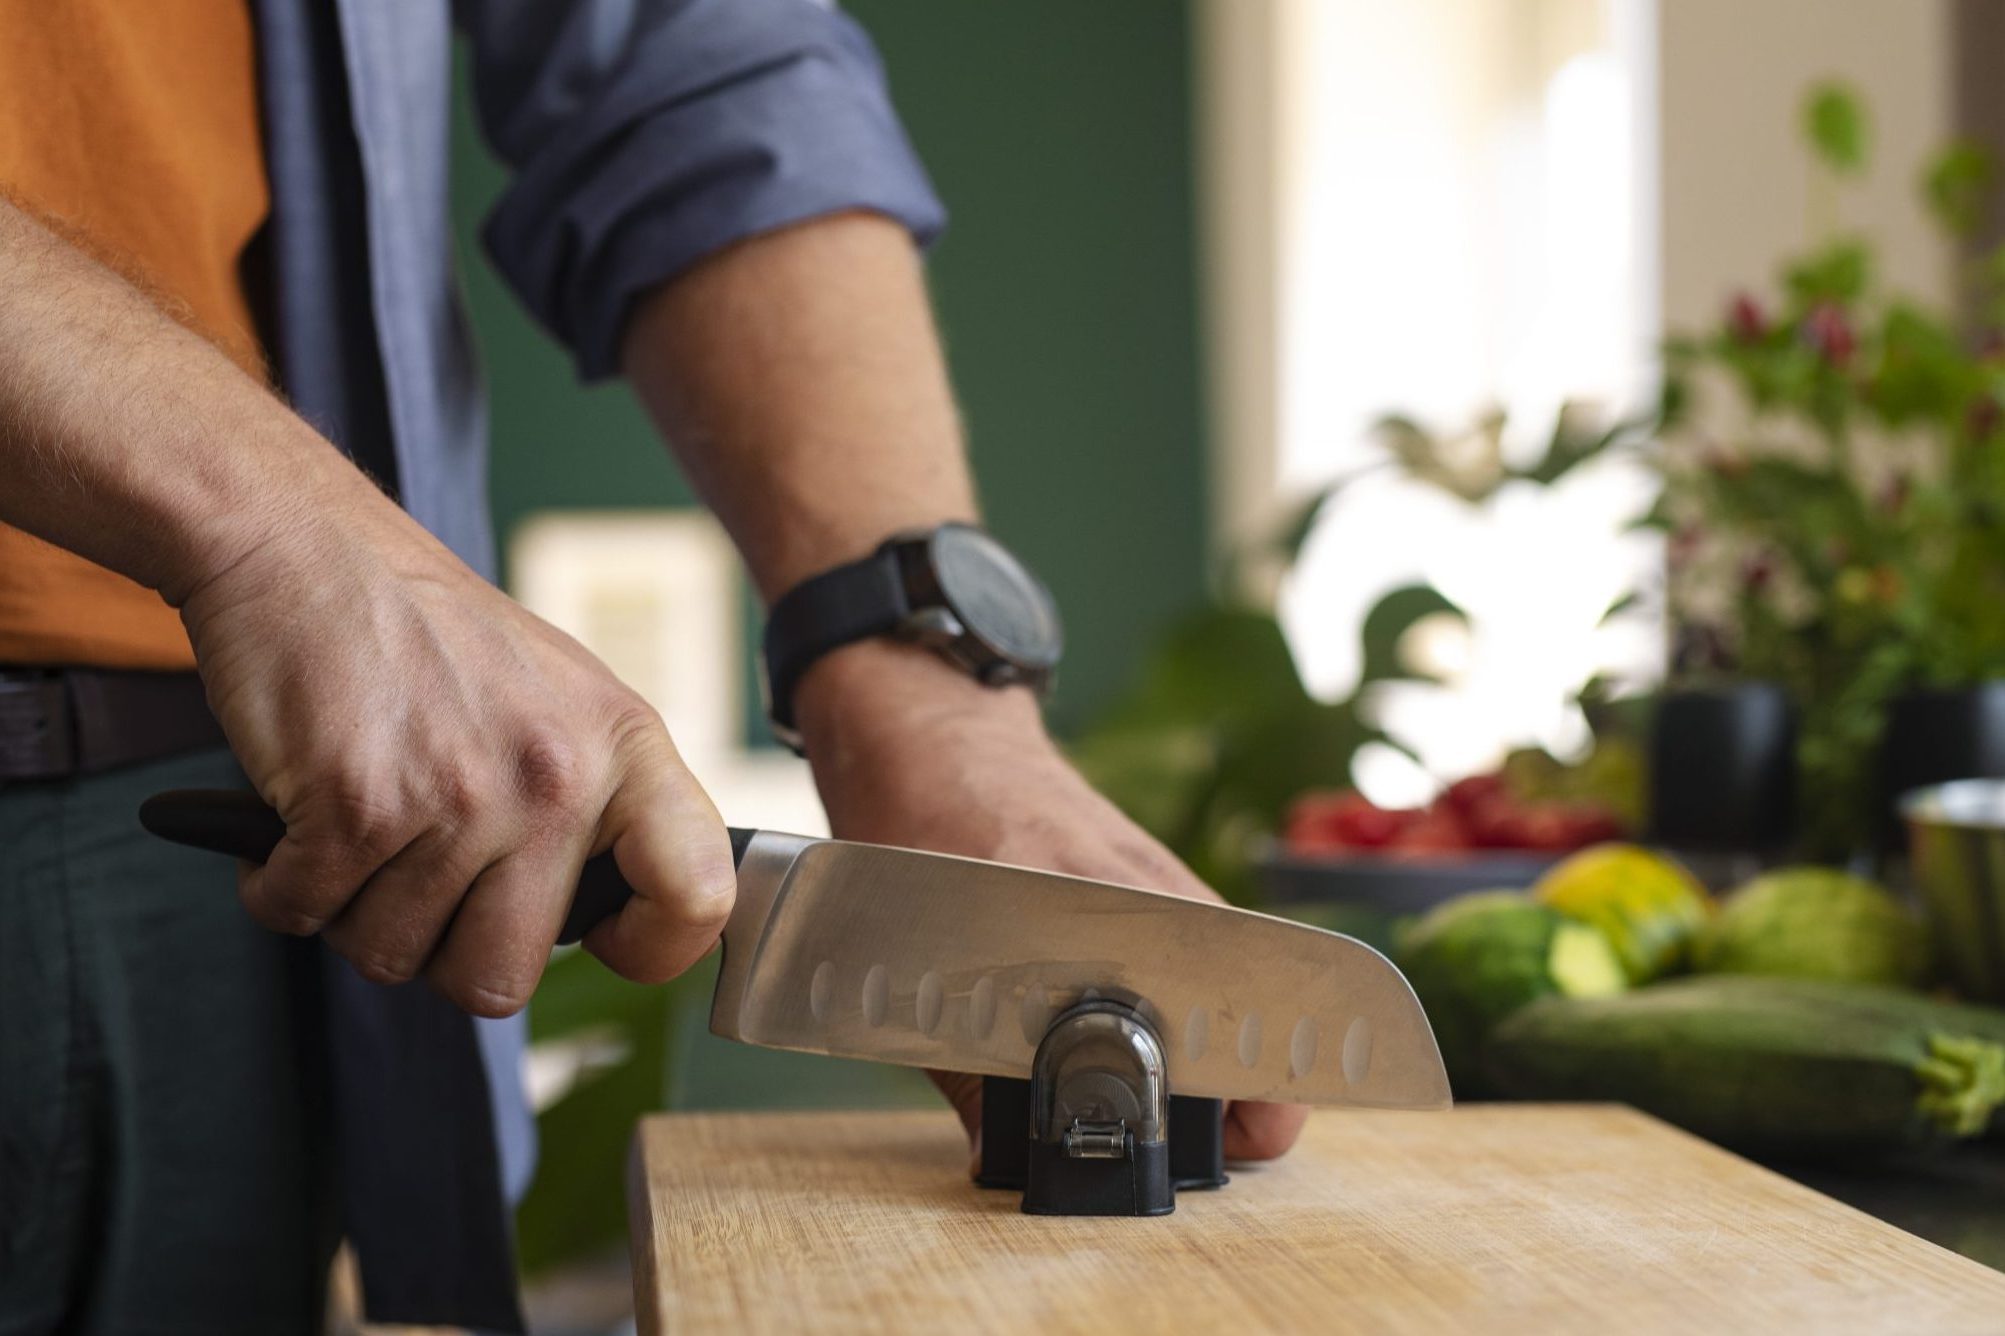 How to Properly Sharpen Kitchen Knives - CNET